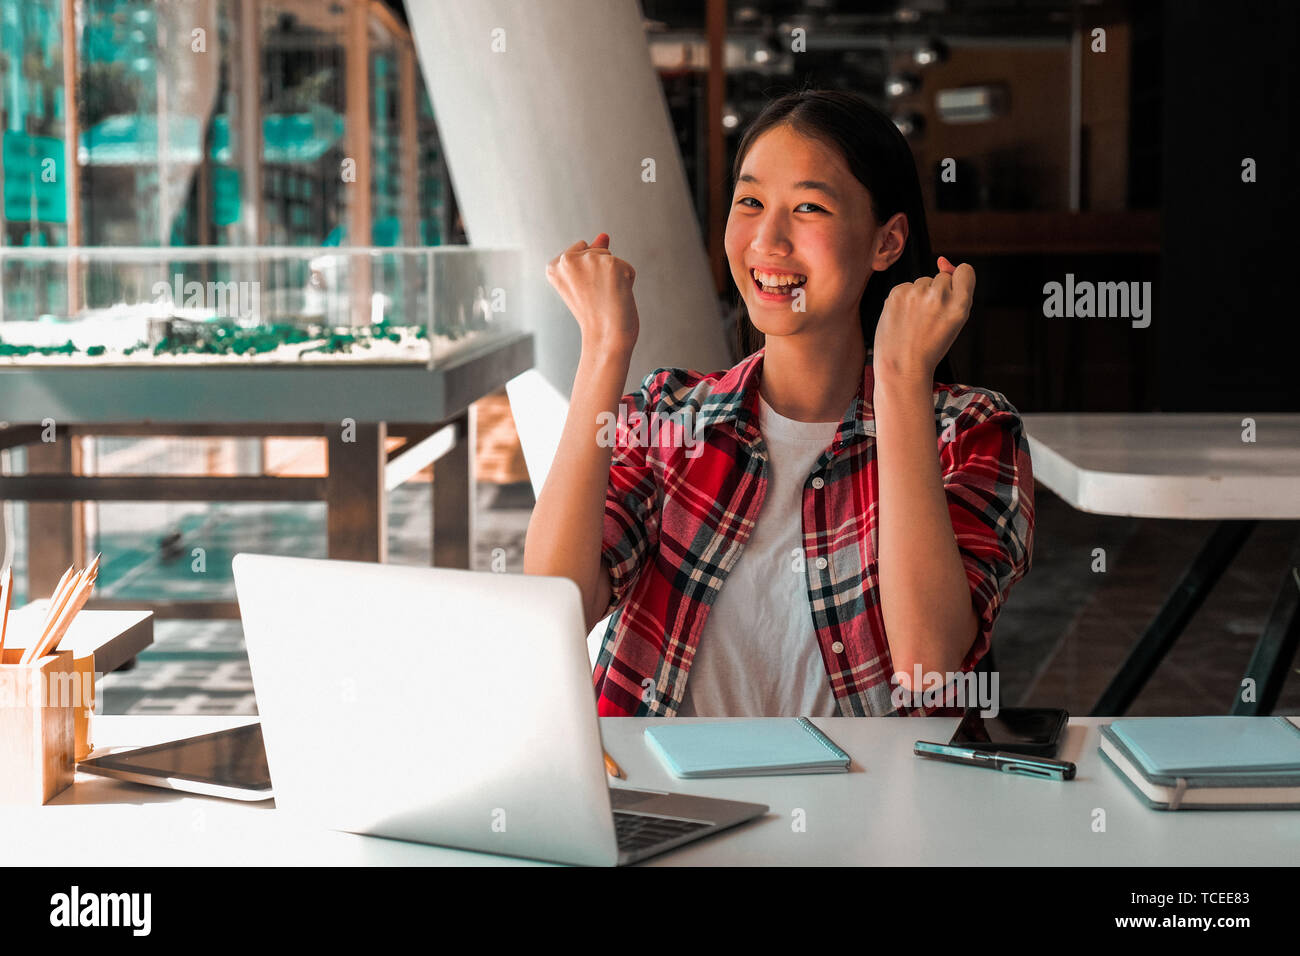 happy asian woman girl teenager raising hands with gladness happiness Stock Photo